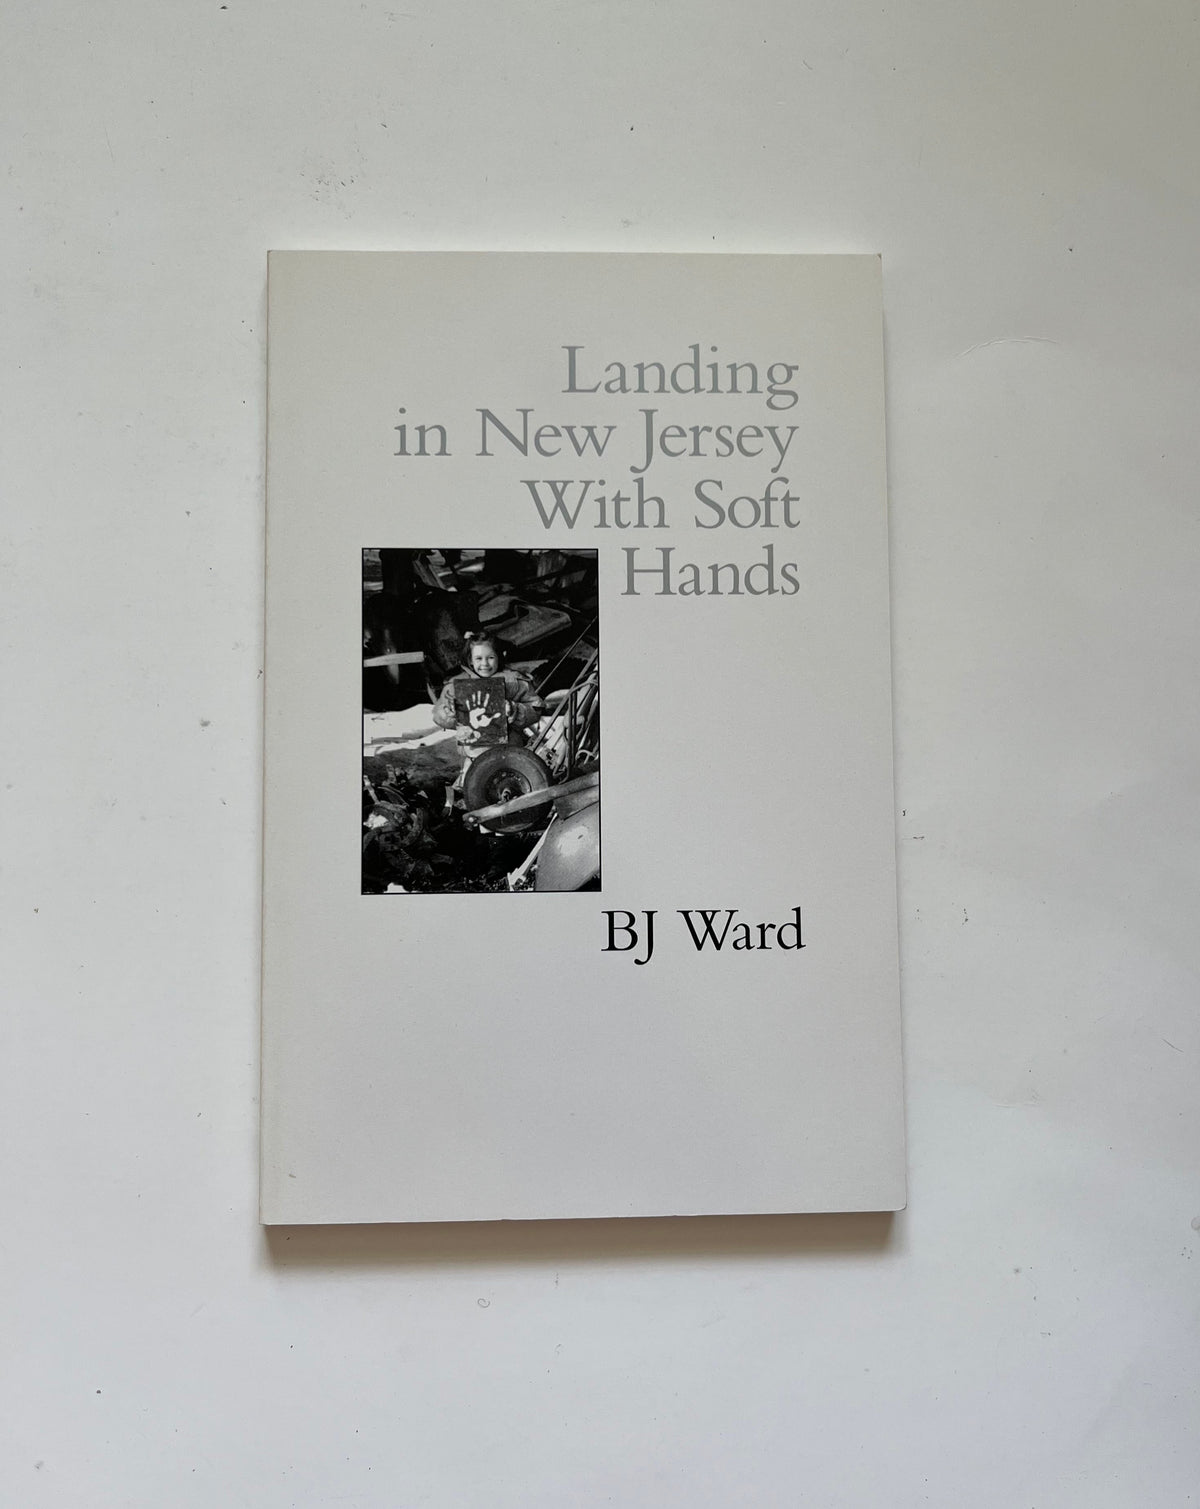 Landing in New Jersey with Soft Hands by BJ Ward